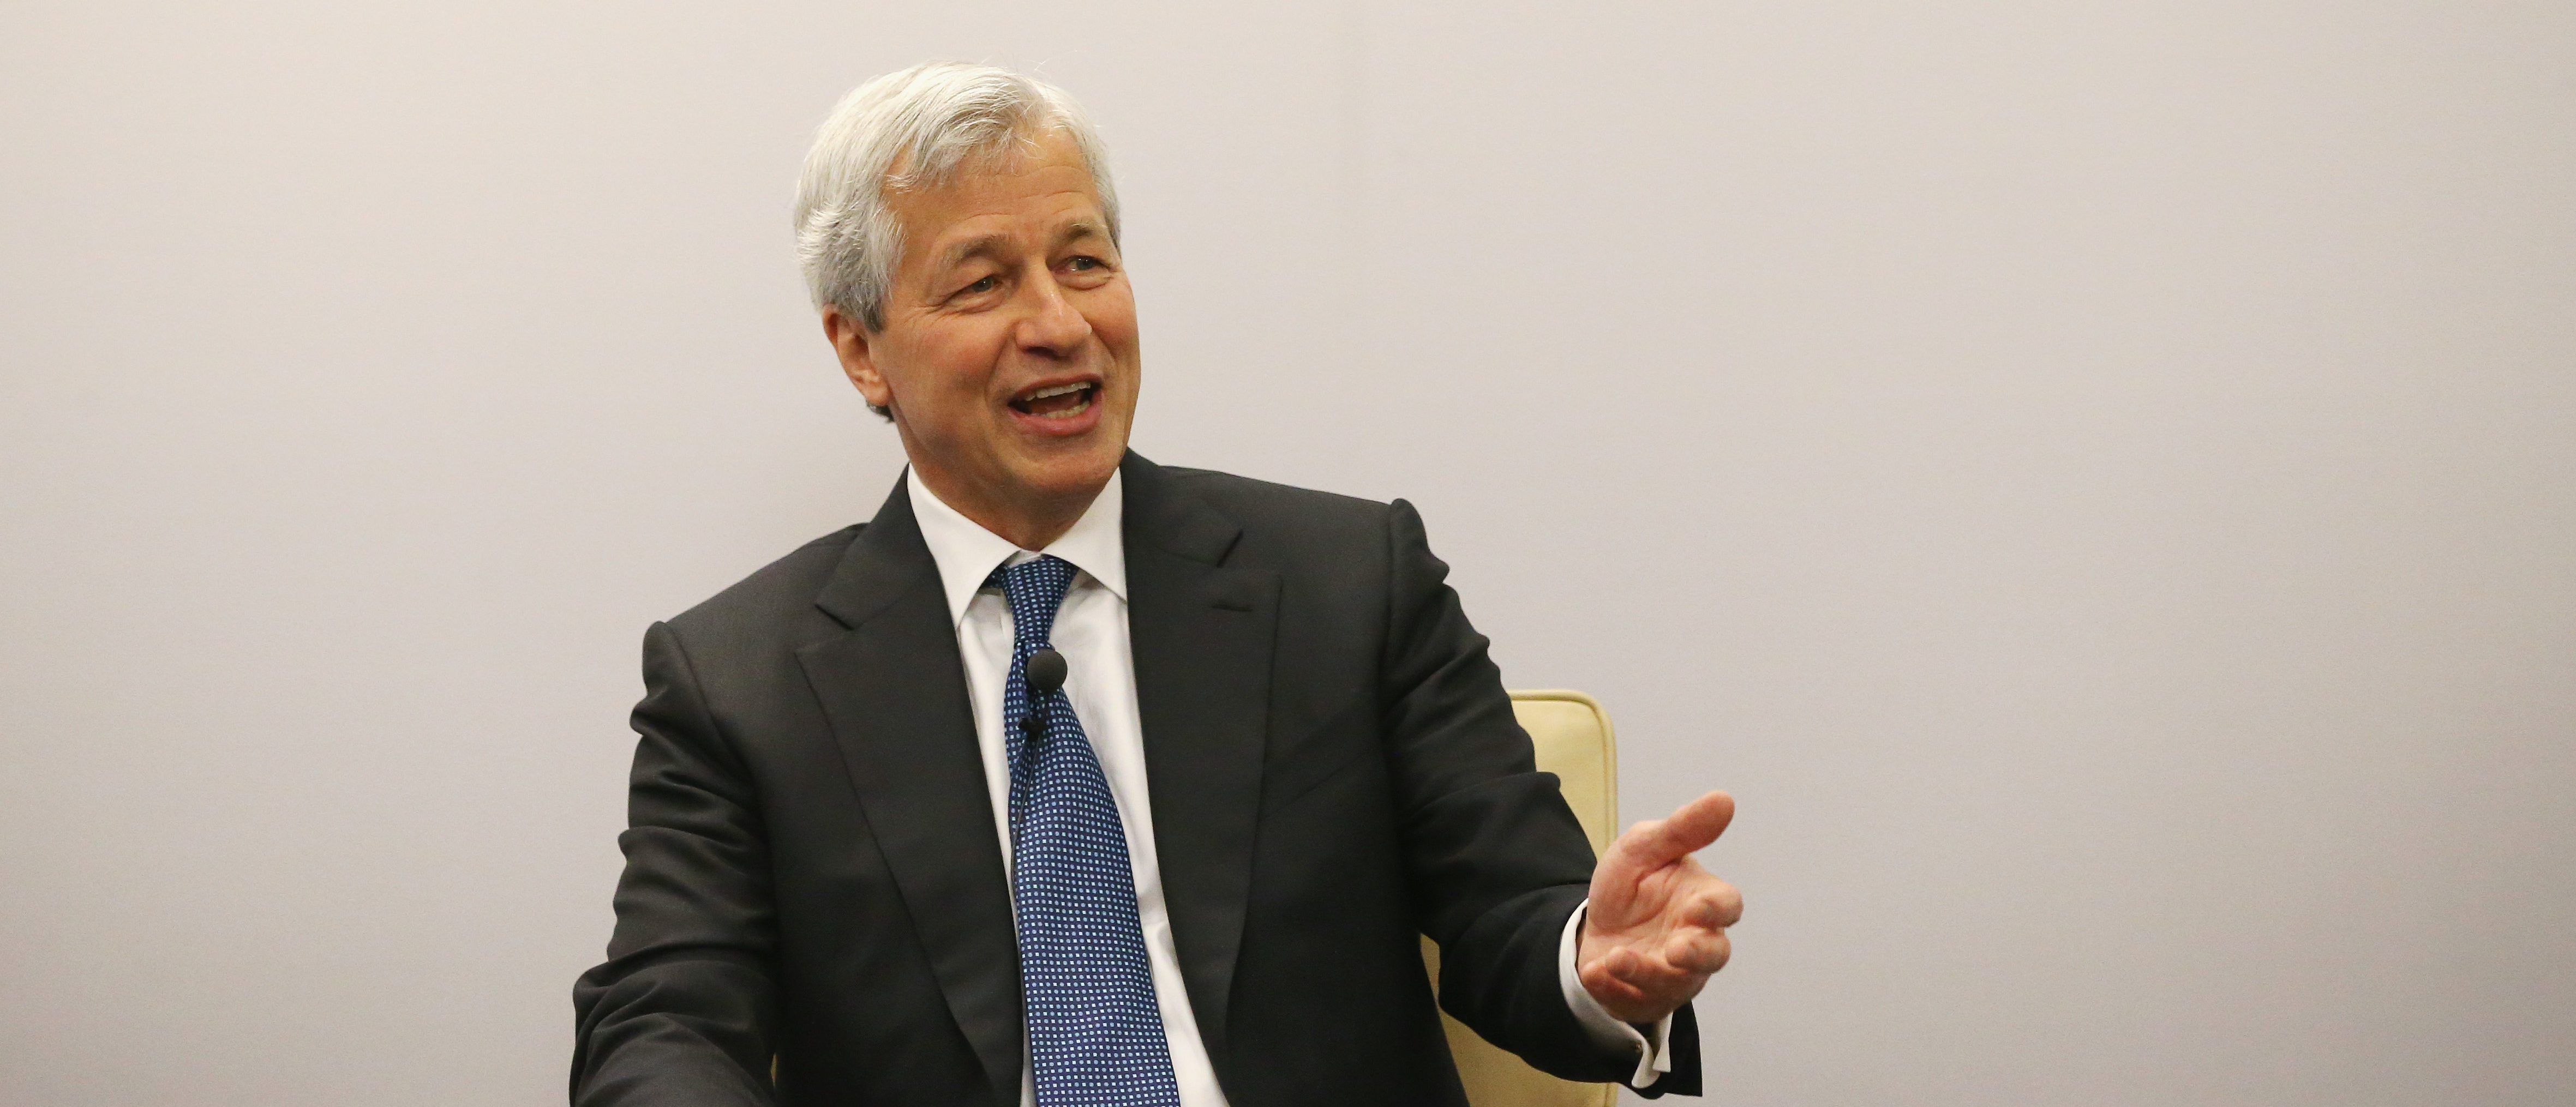 WASHINGTON, DC - APRIL 05: Jamie Dimon, chairman and CEO of JPMorgan Chase & Co., participates in a discussion on Detroit's economic recovery on April 5, 2016 in Washington, DC. JPMorgan Chase announced they will make a five-year, $125 million commitment to Detroit's economic recovery. (Photo by Mark Wilson/Getty Images)